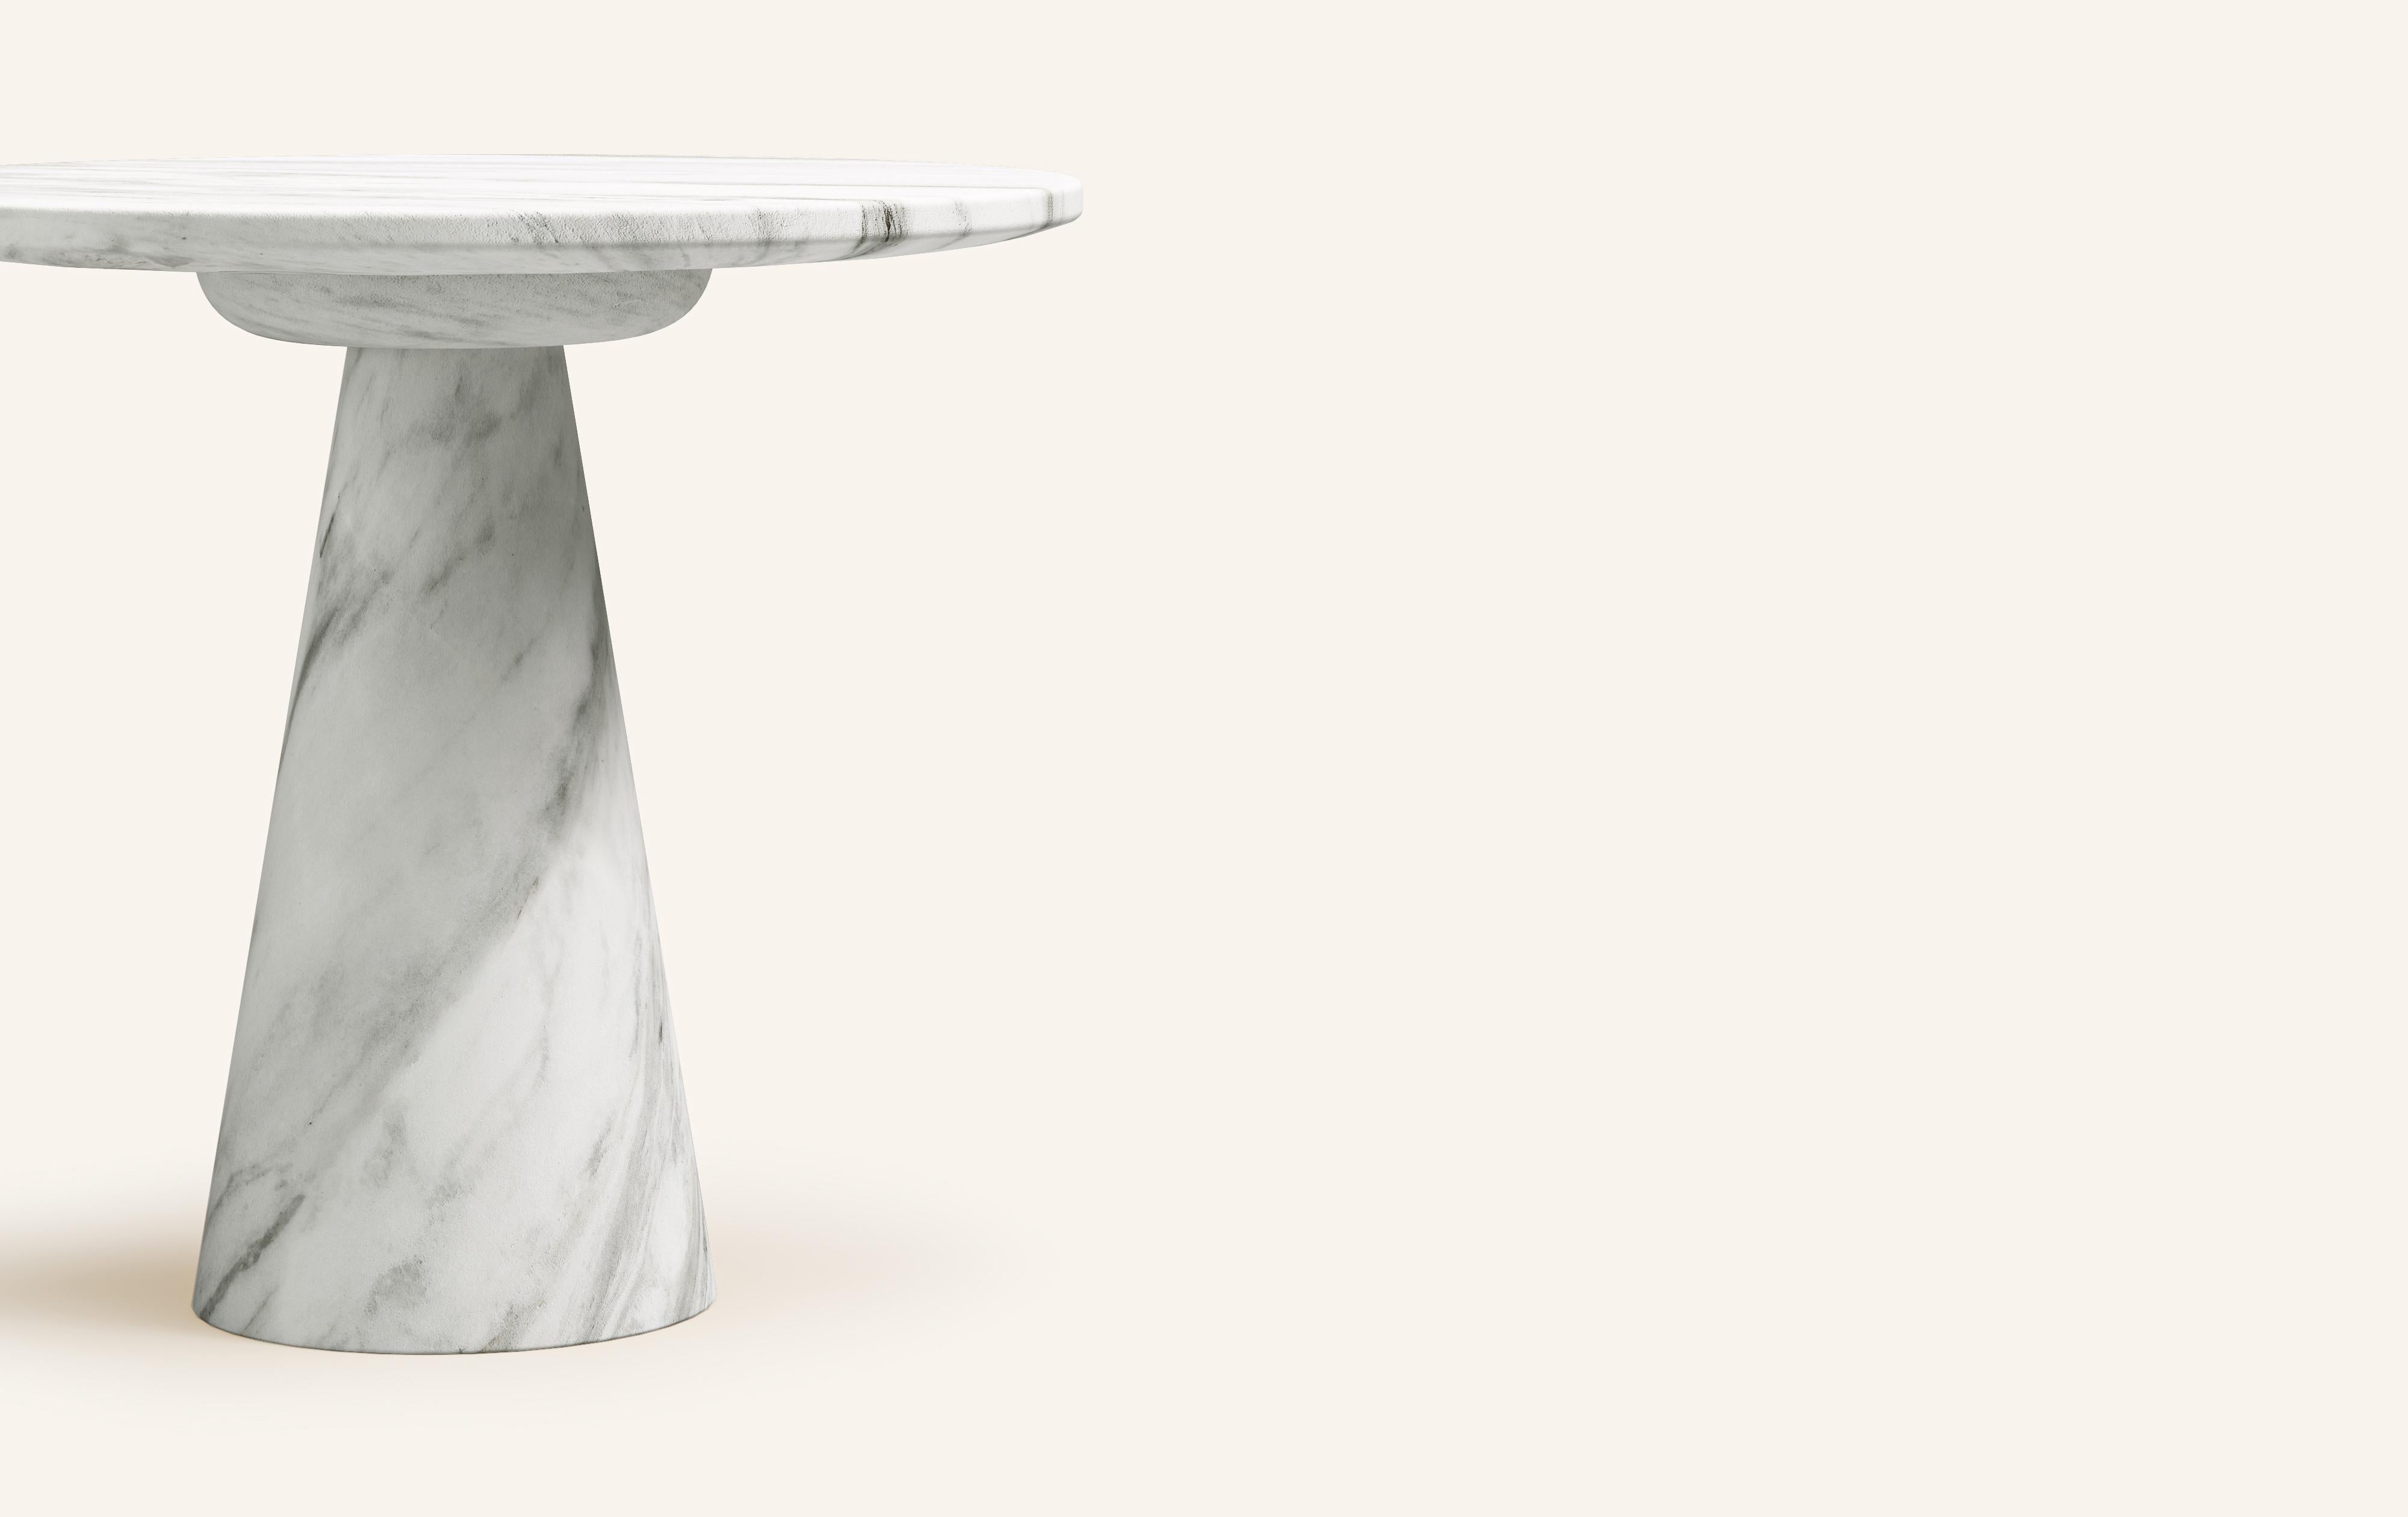 Organic Modern FORM(LA) Cono Round Side Table 24”L x 24”W x 21”H Volakas White Marble For Sale